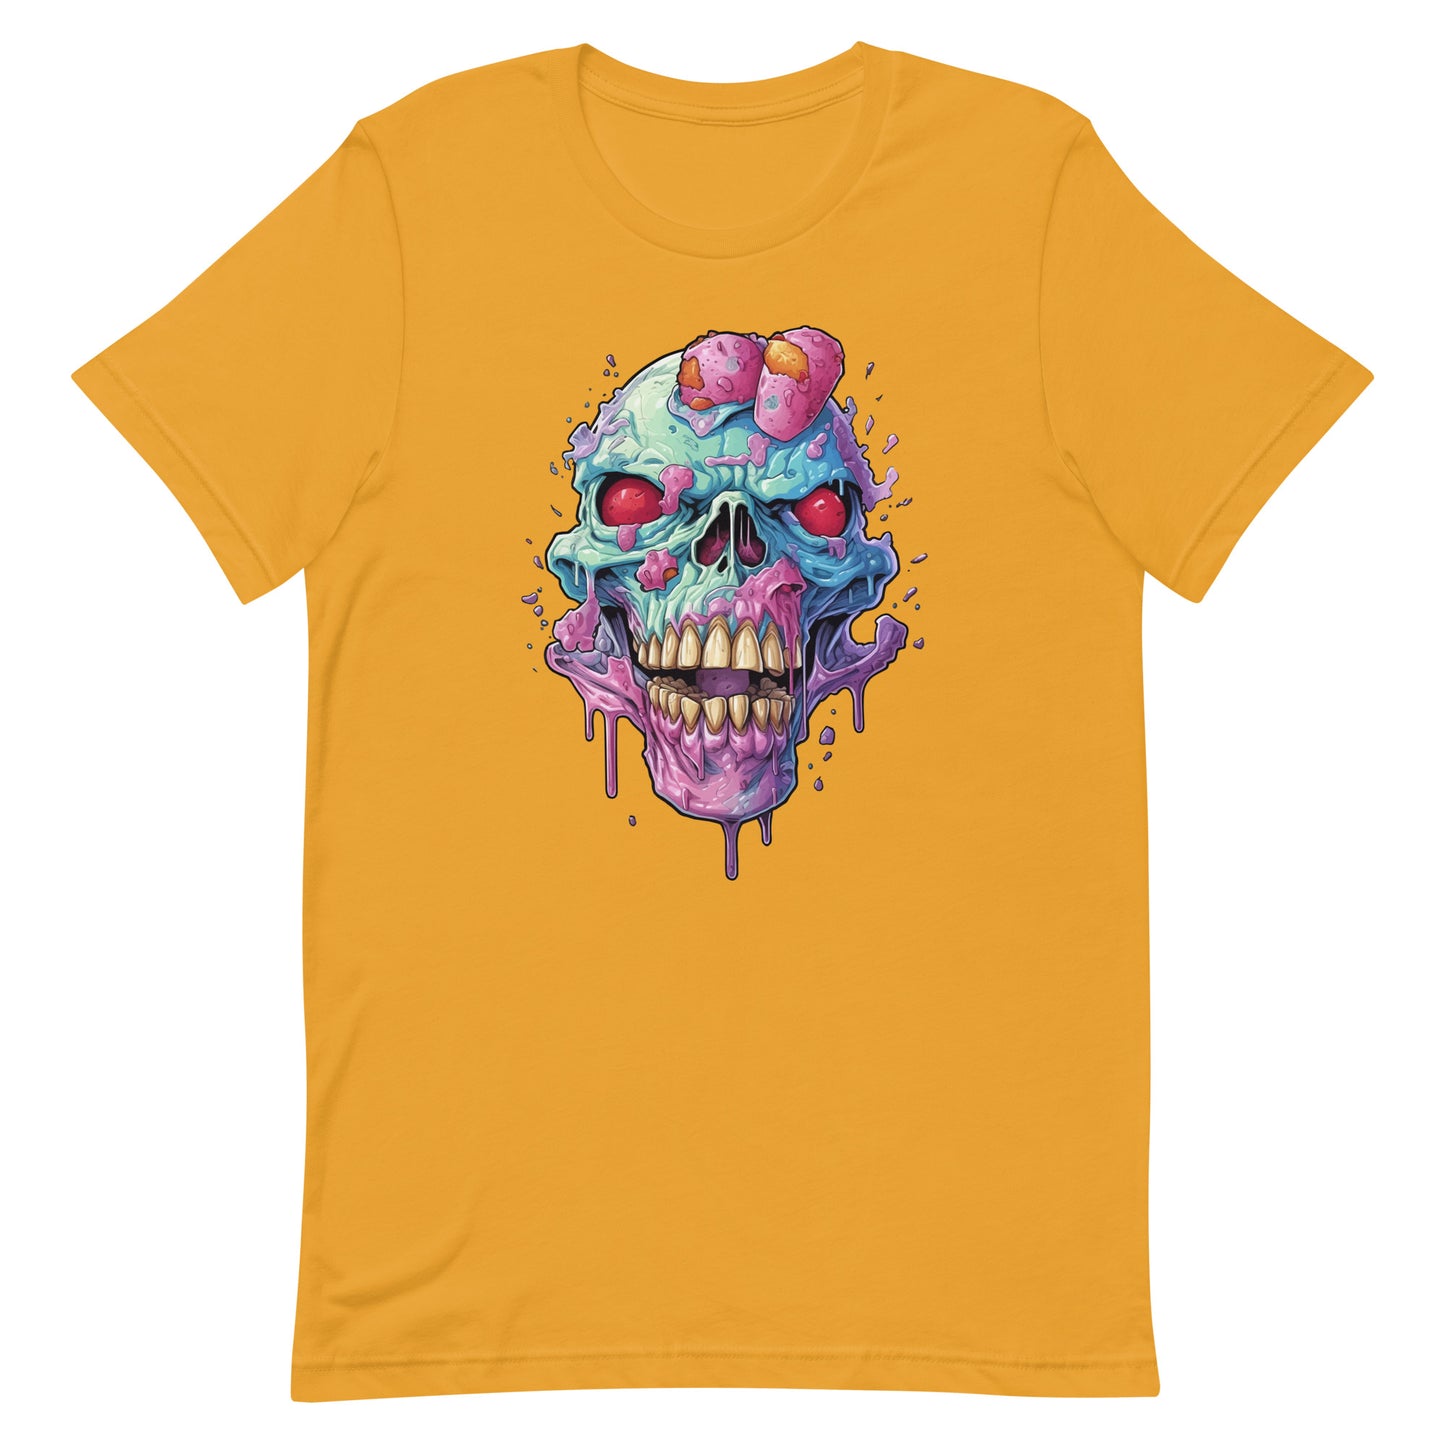 Ice cream skull, Head bones with pink candies and red eyes, Pop Art style illustration, Cartoon skull with crazy dripping ice cream - Unisex t-shirt